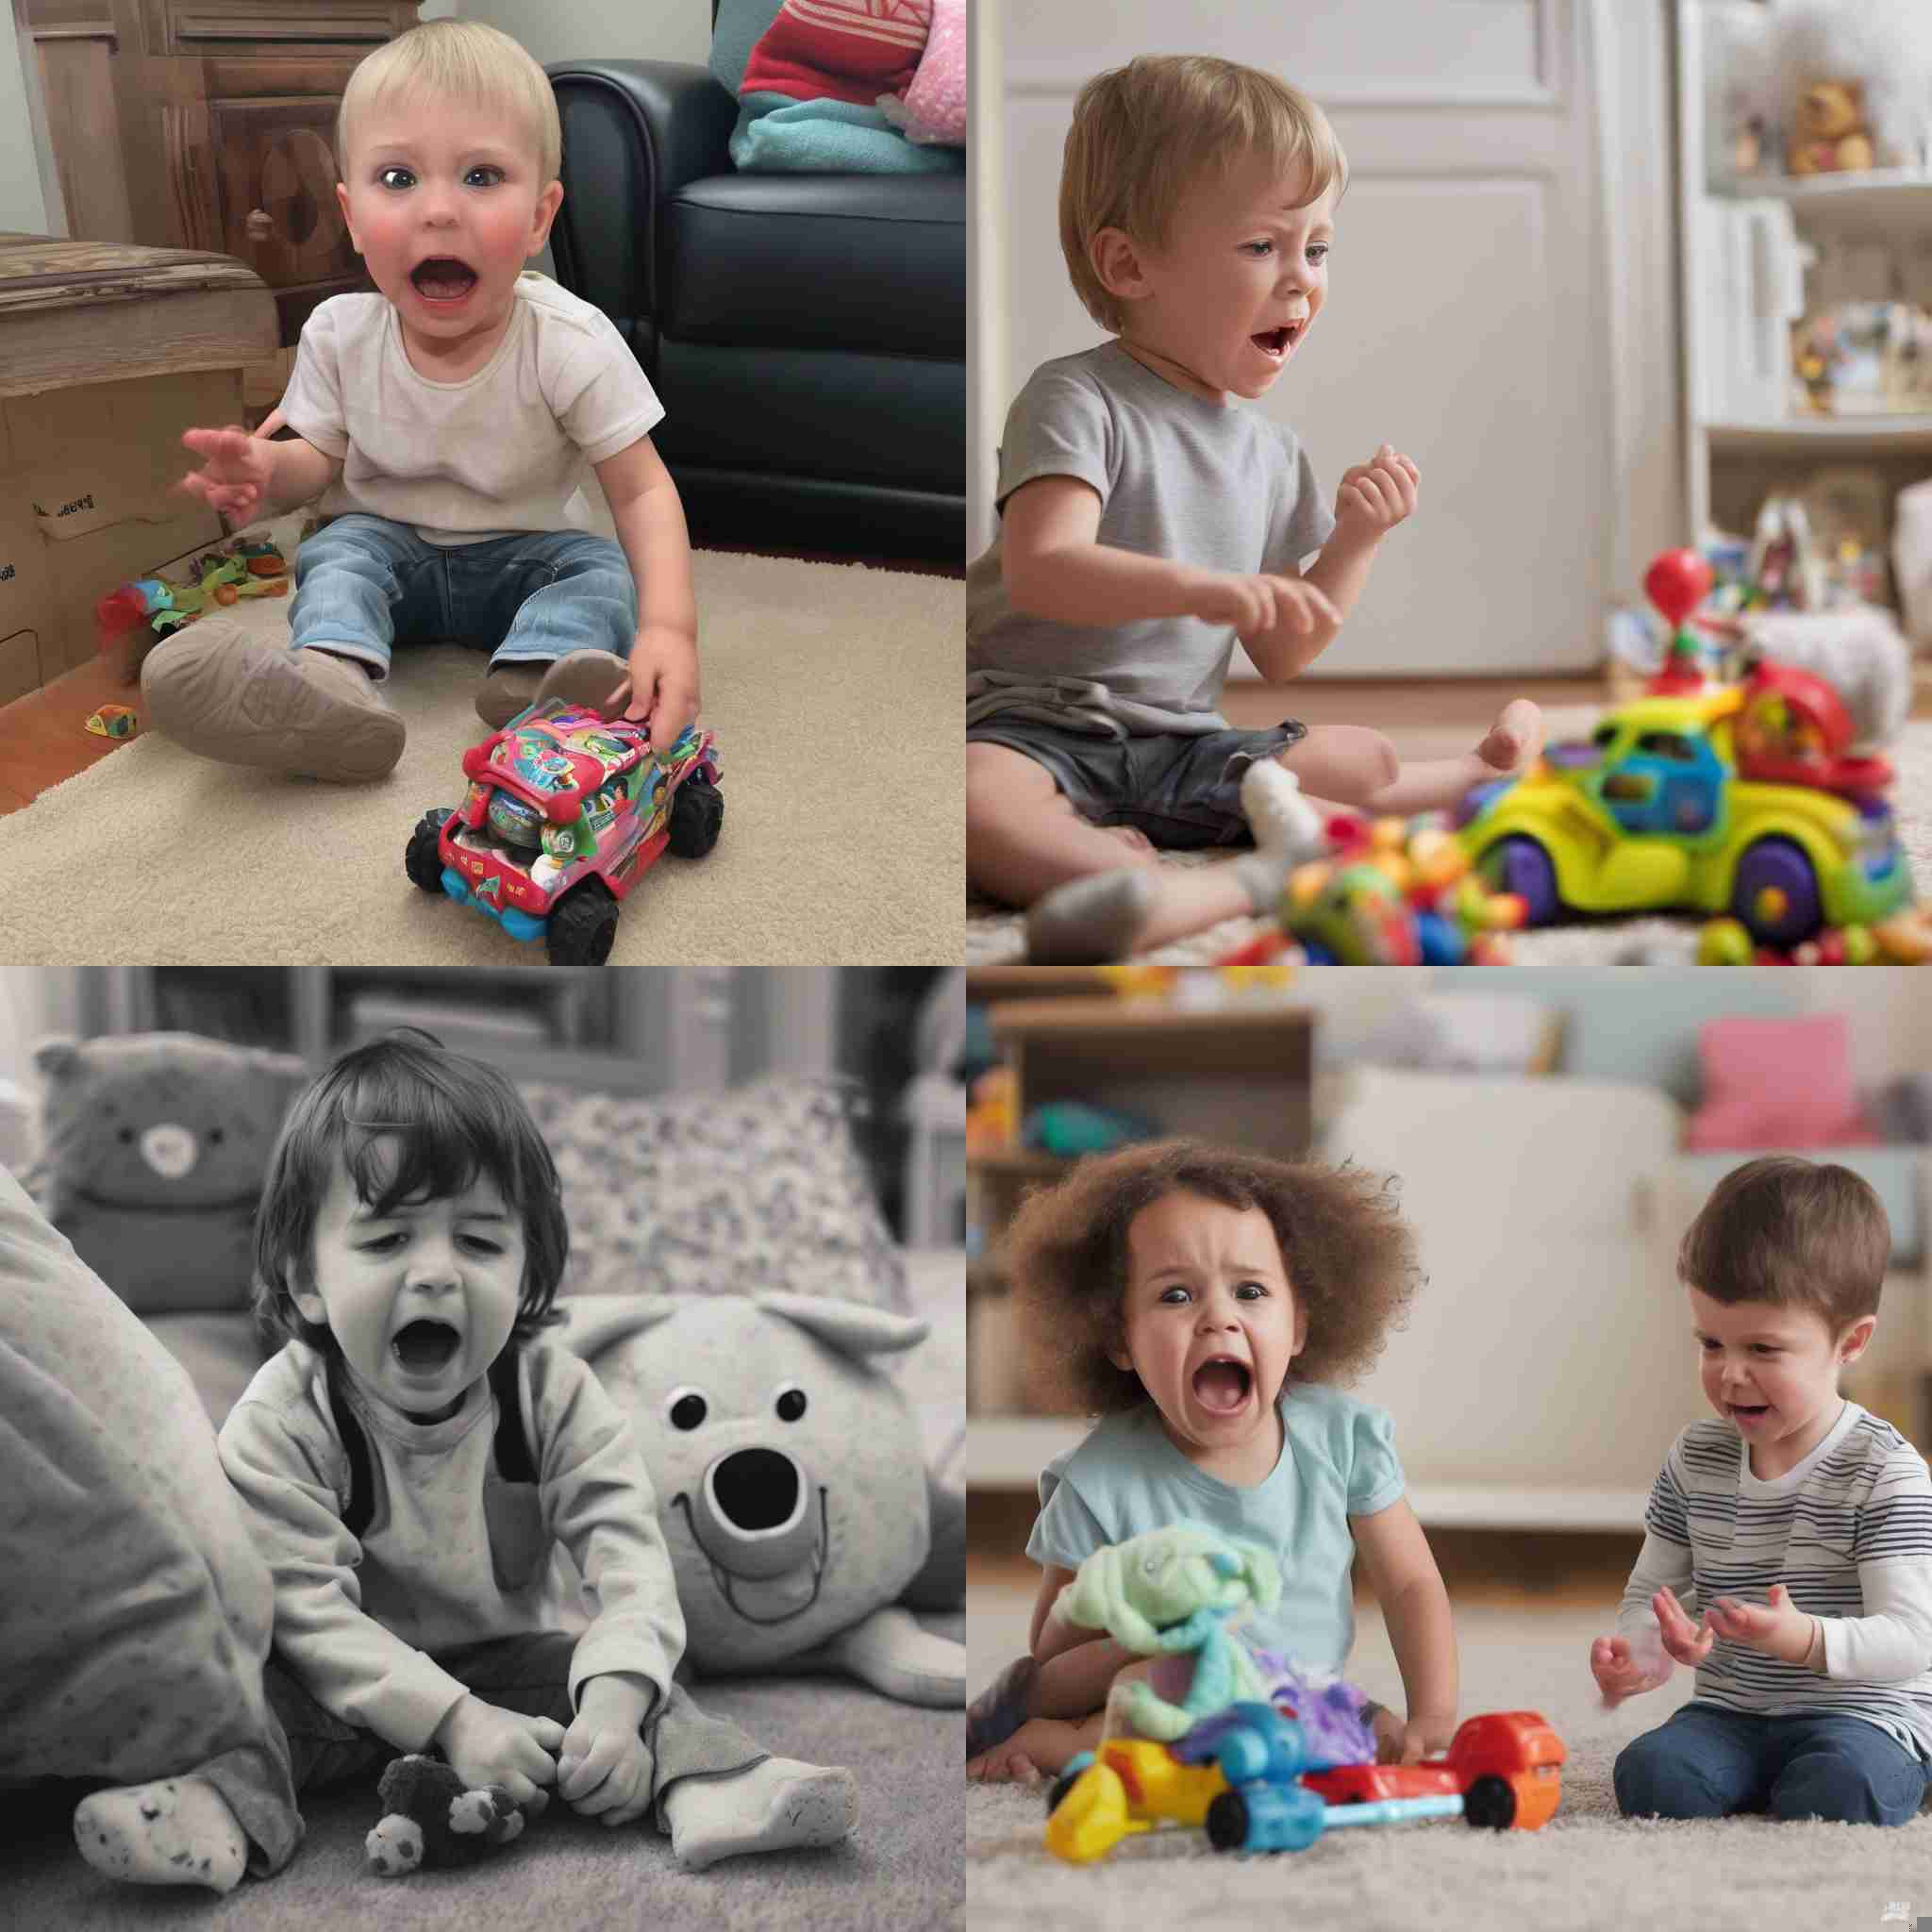 A child's reaction to getting a new toy